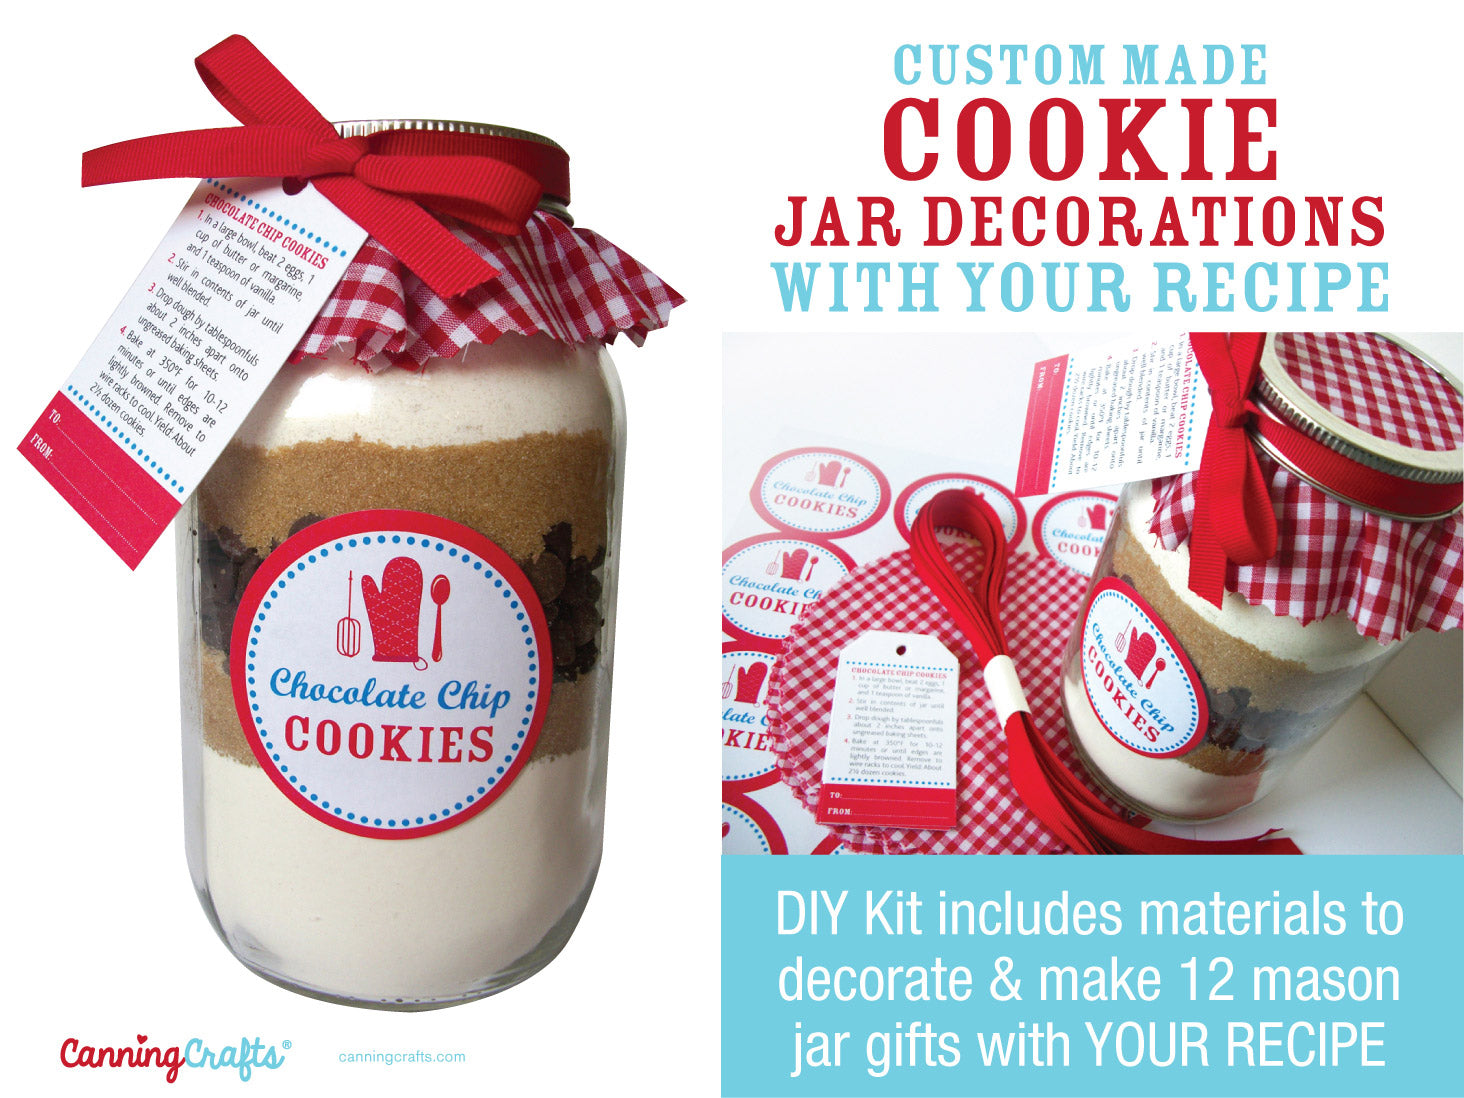 Custom Cookie Mason Jar Kit decorations made for YOUR recipe | CanningCrafts.com